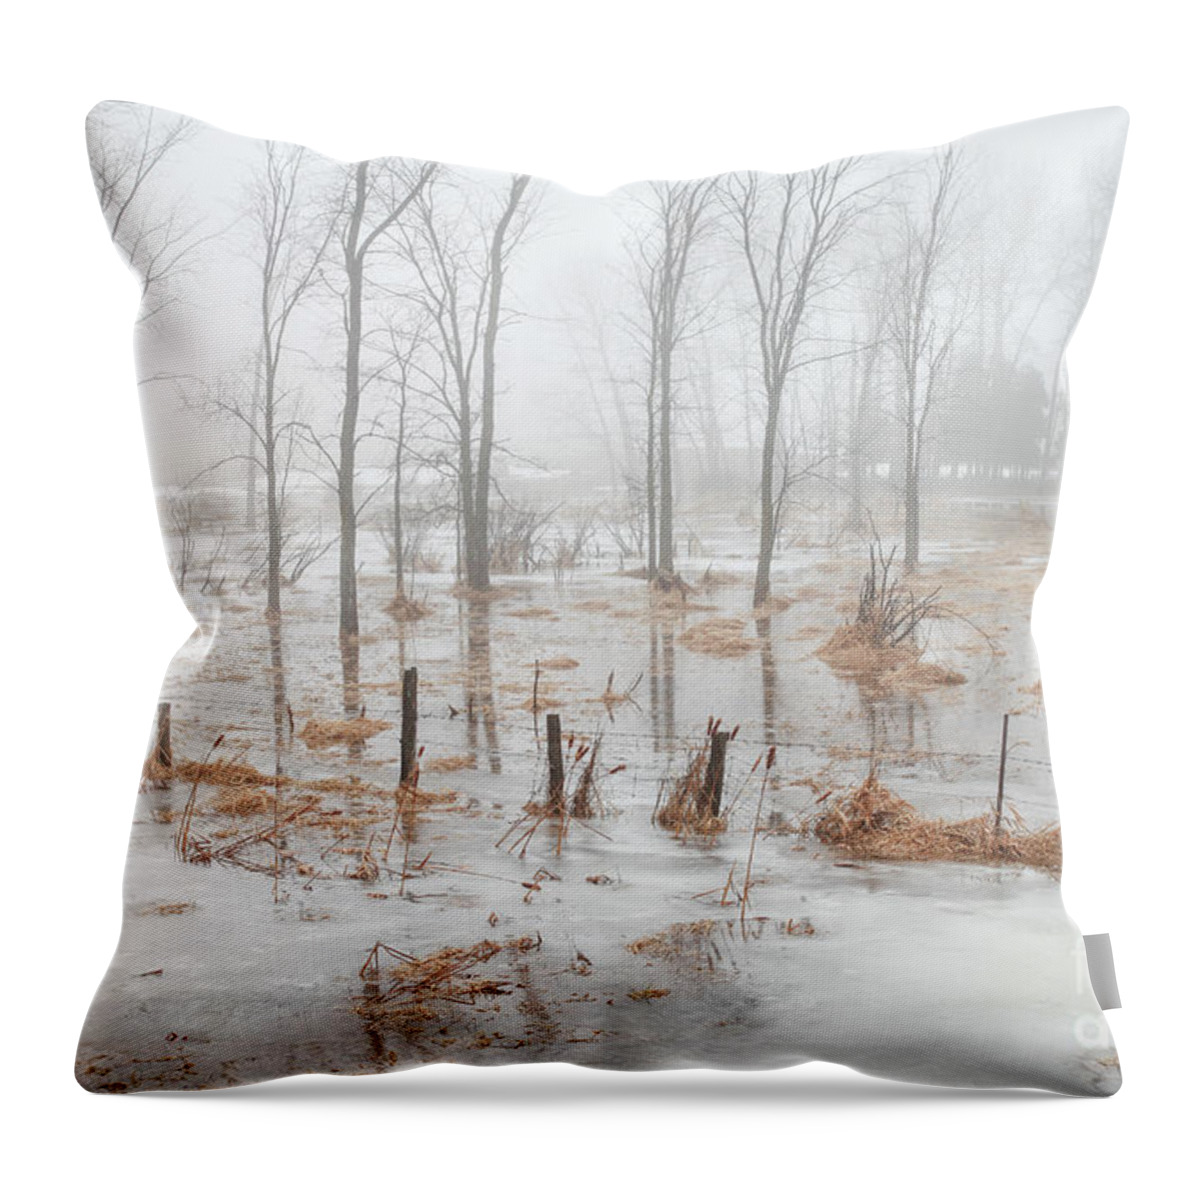 Foggy Day Throw Pillow featuring the photograph Foggy Day by Makiko Ishihara